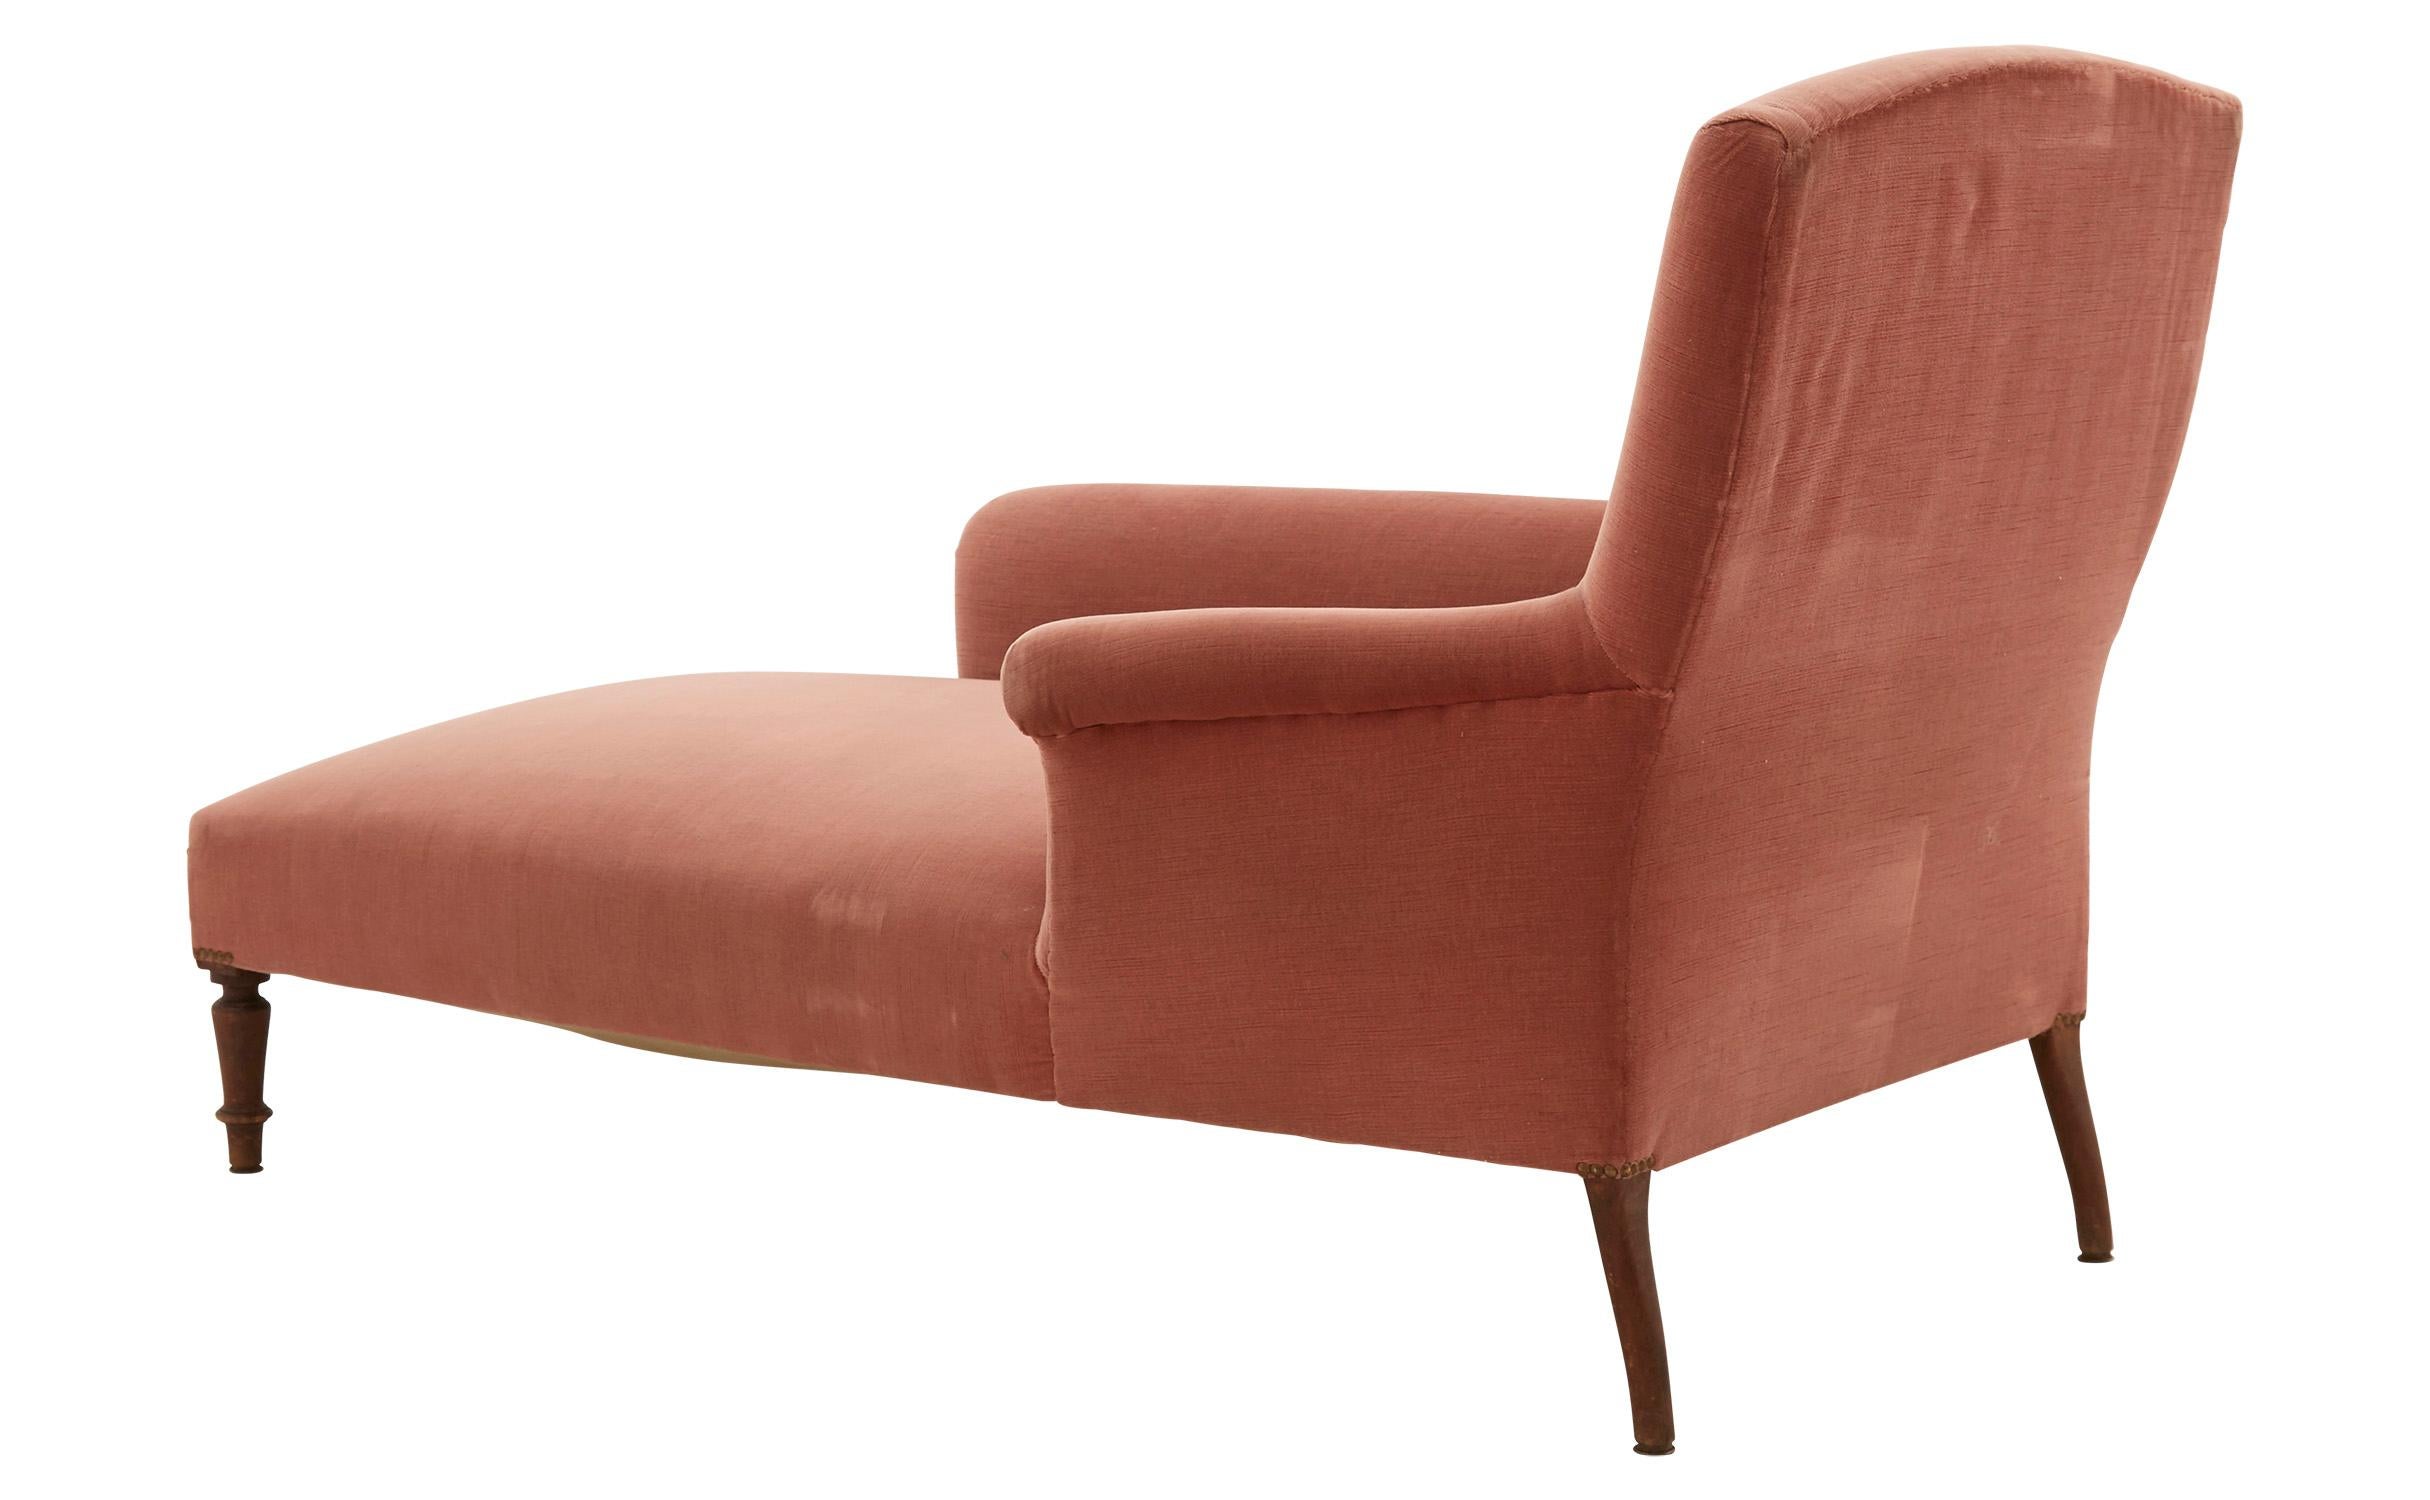 • Pink velvet upholstery as found
• Late 19th century
• France

Dimensions:
• 31.5